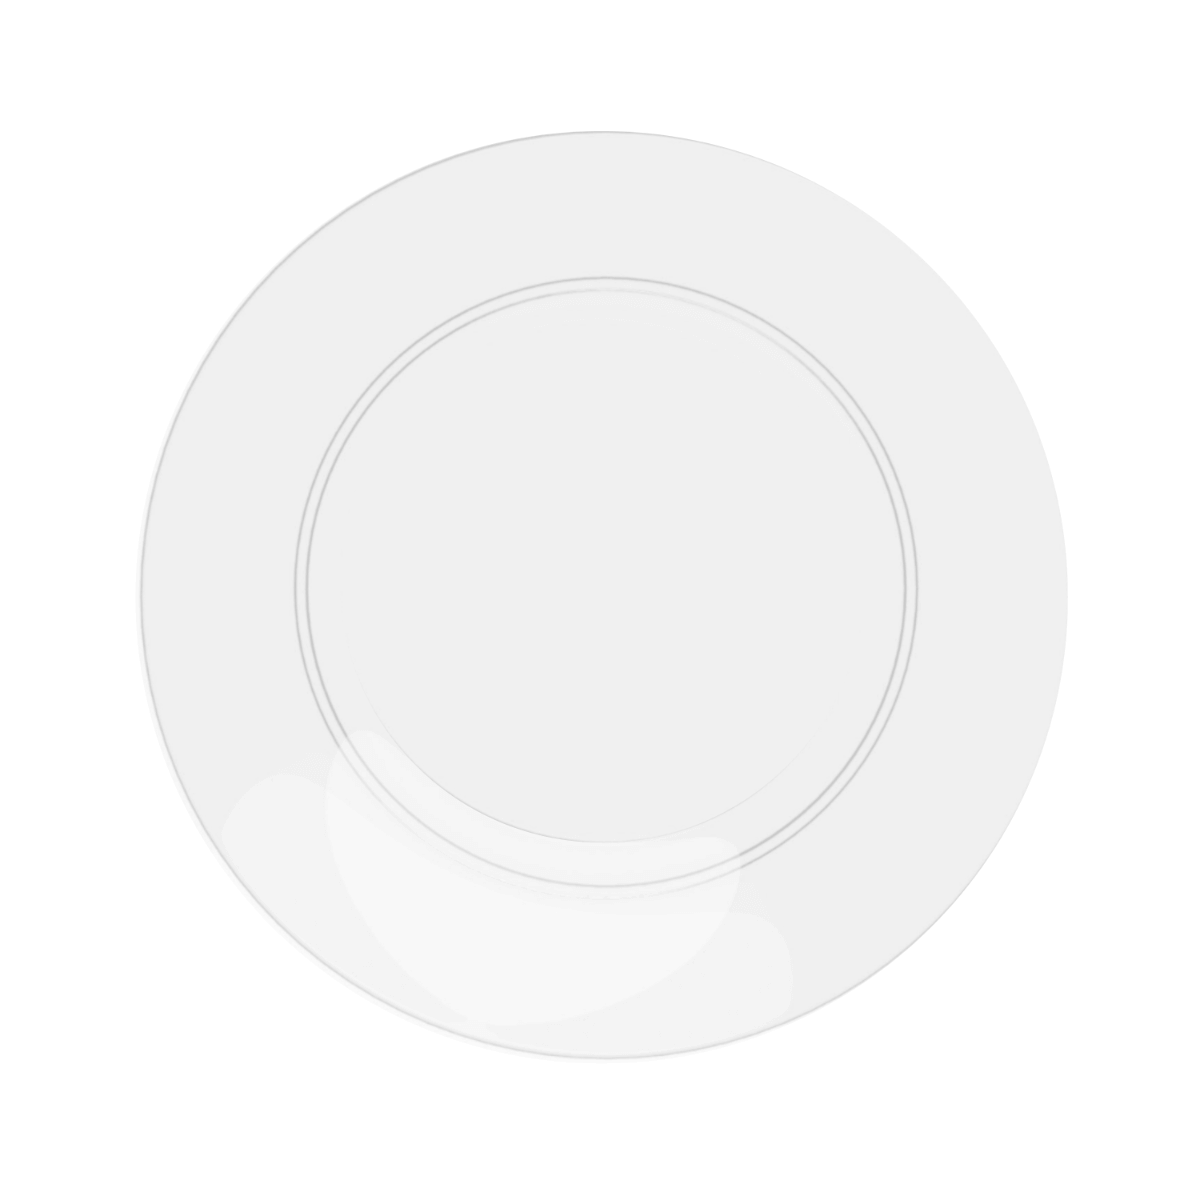 10 In. Trend Glass Look Plastic Plates | 10 Count